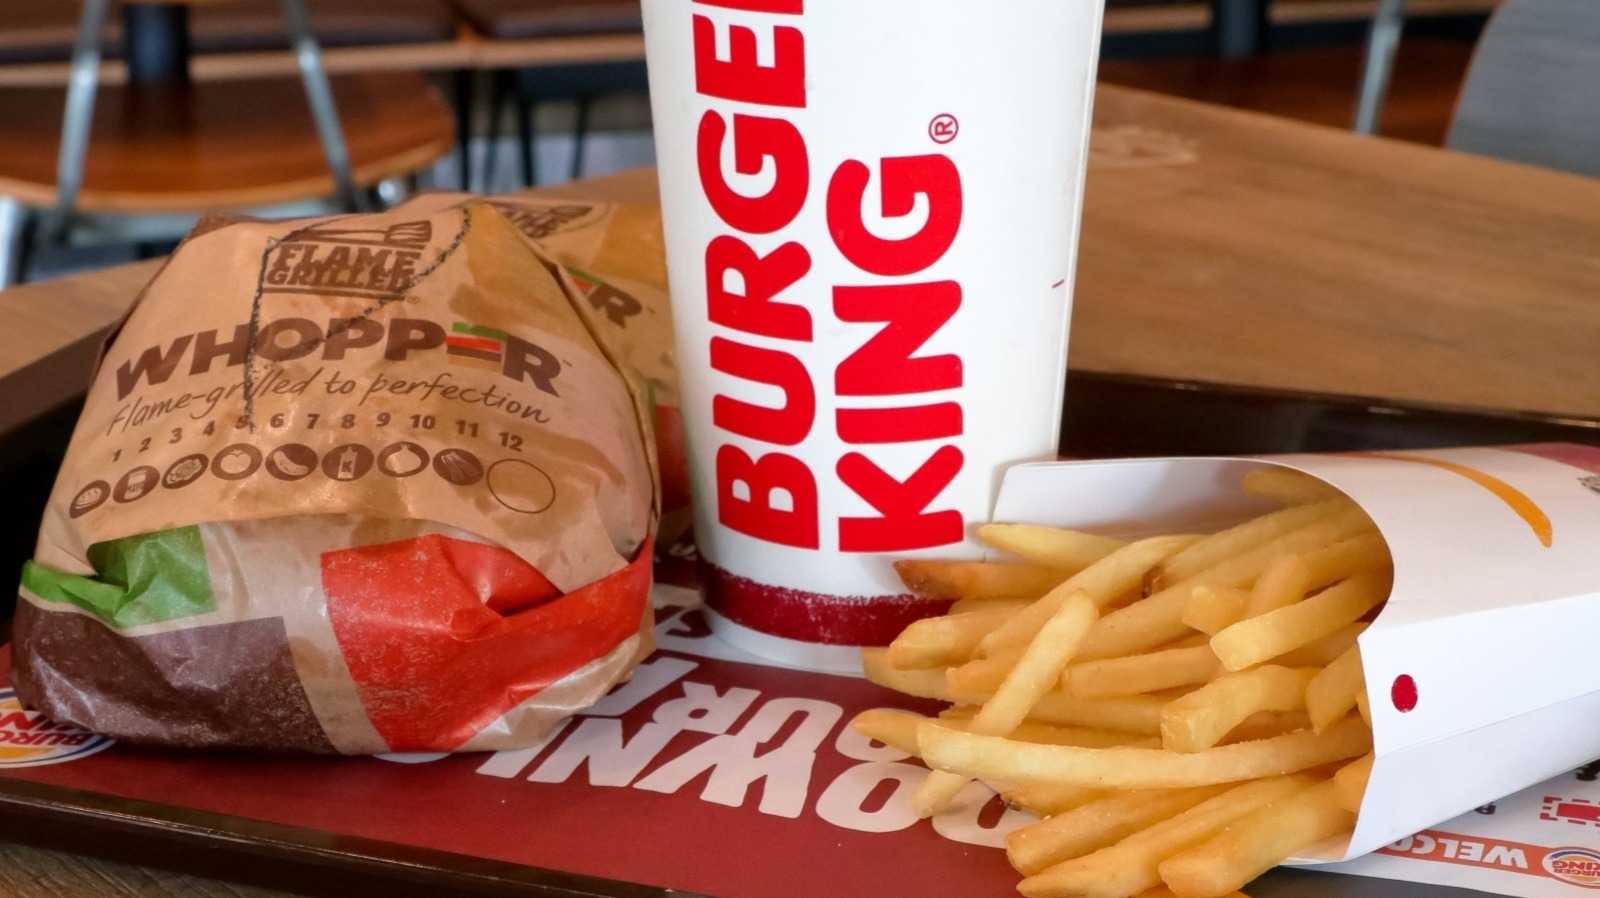 Is Burger King Open On Easter Sunday 2022?